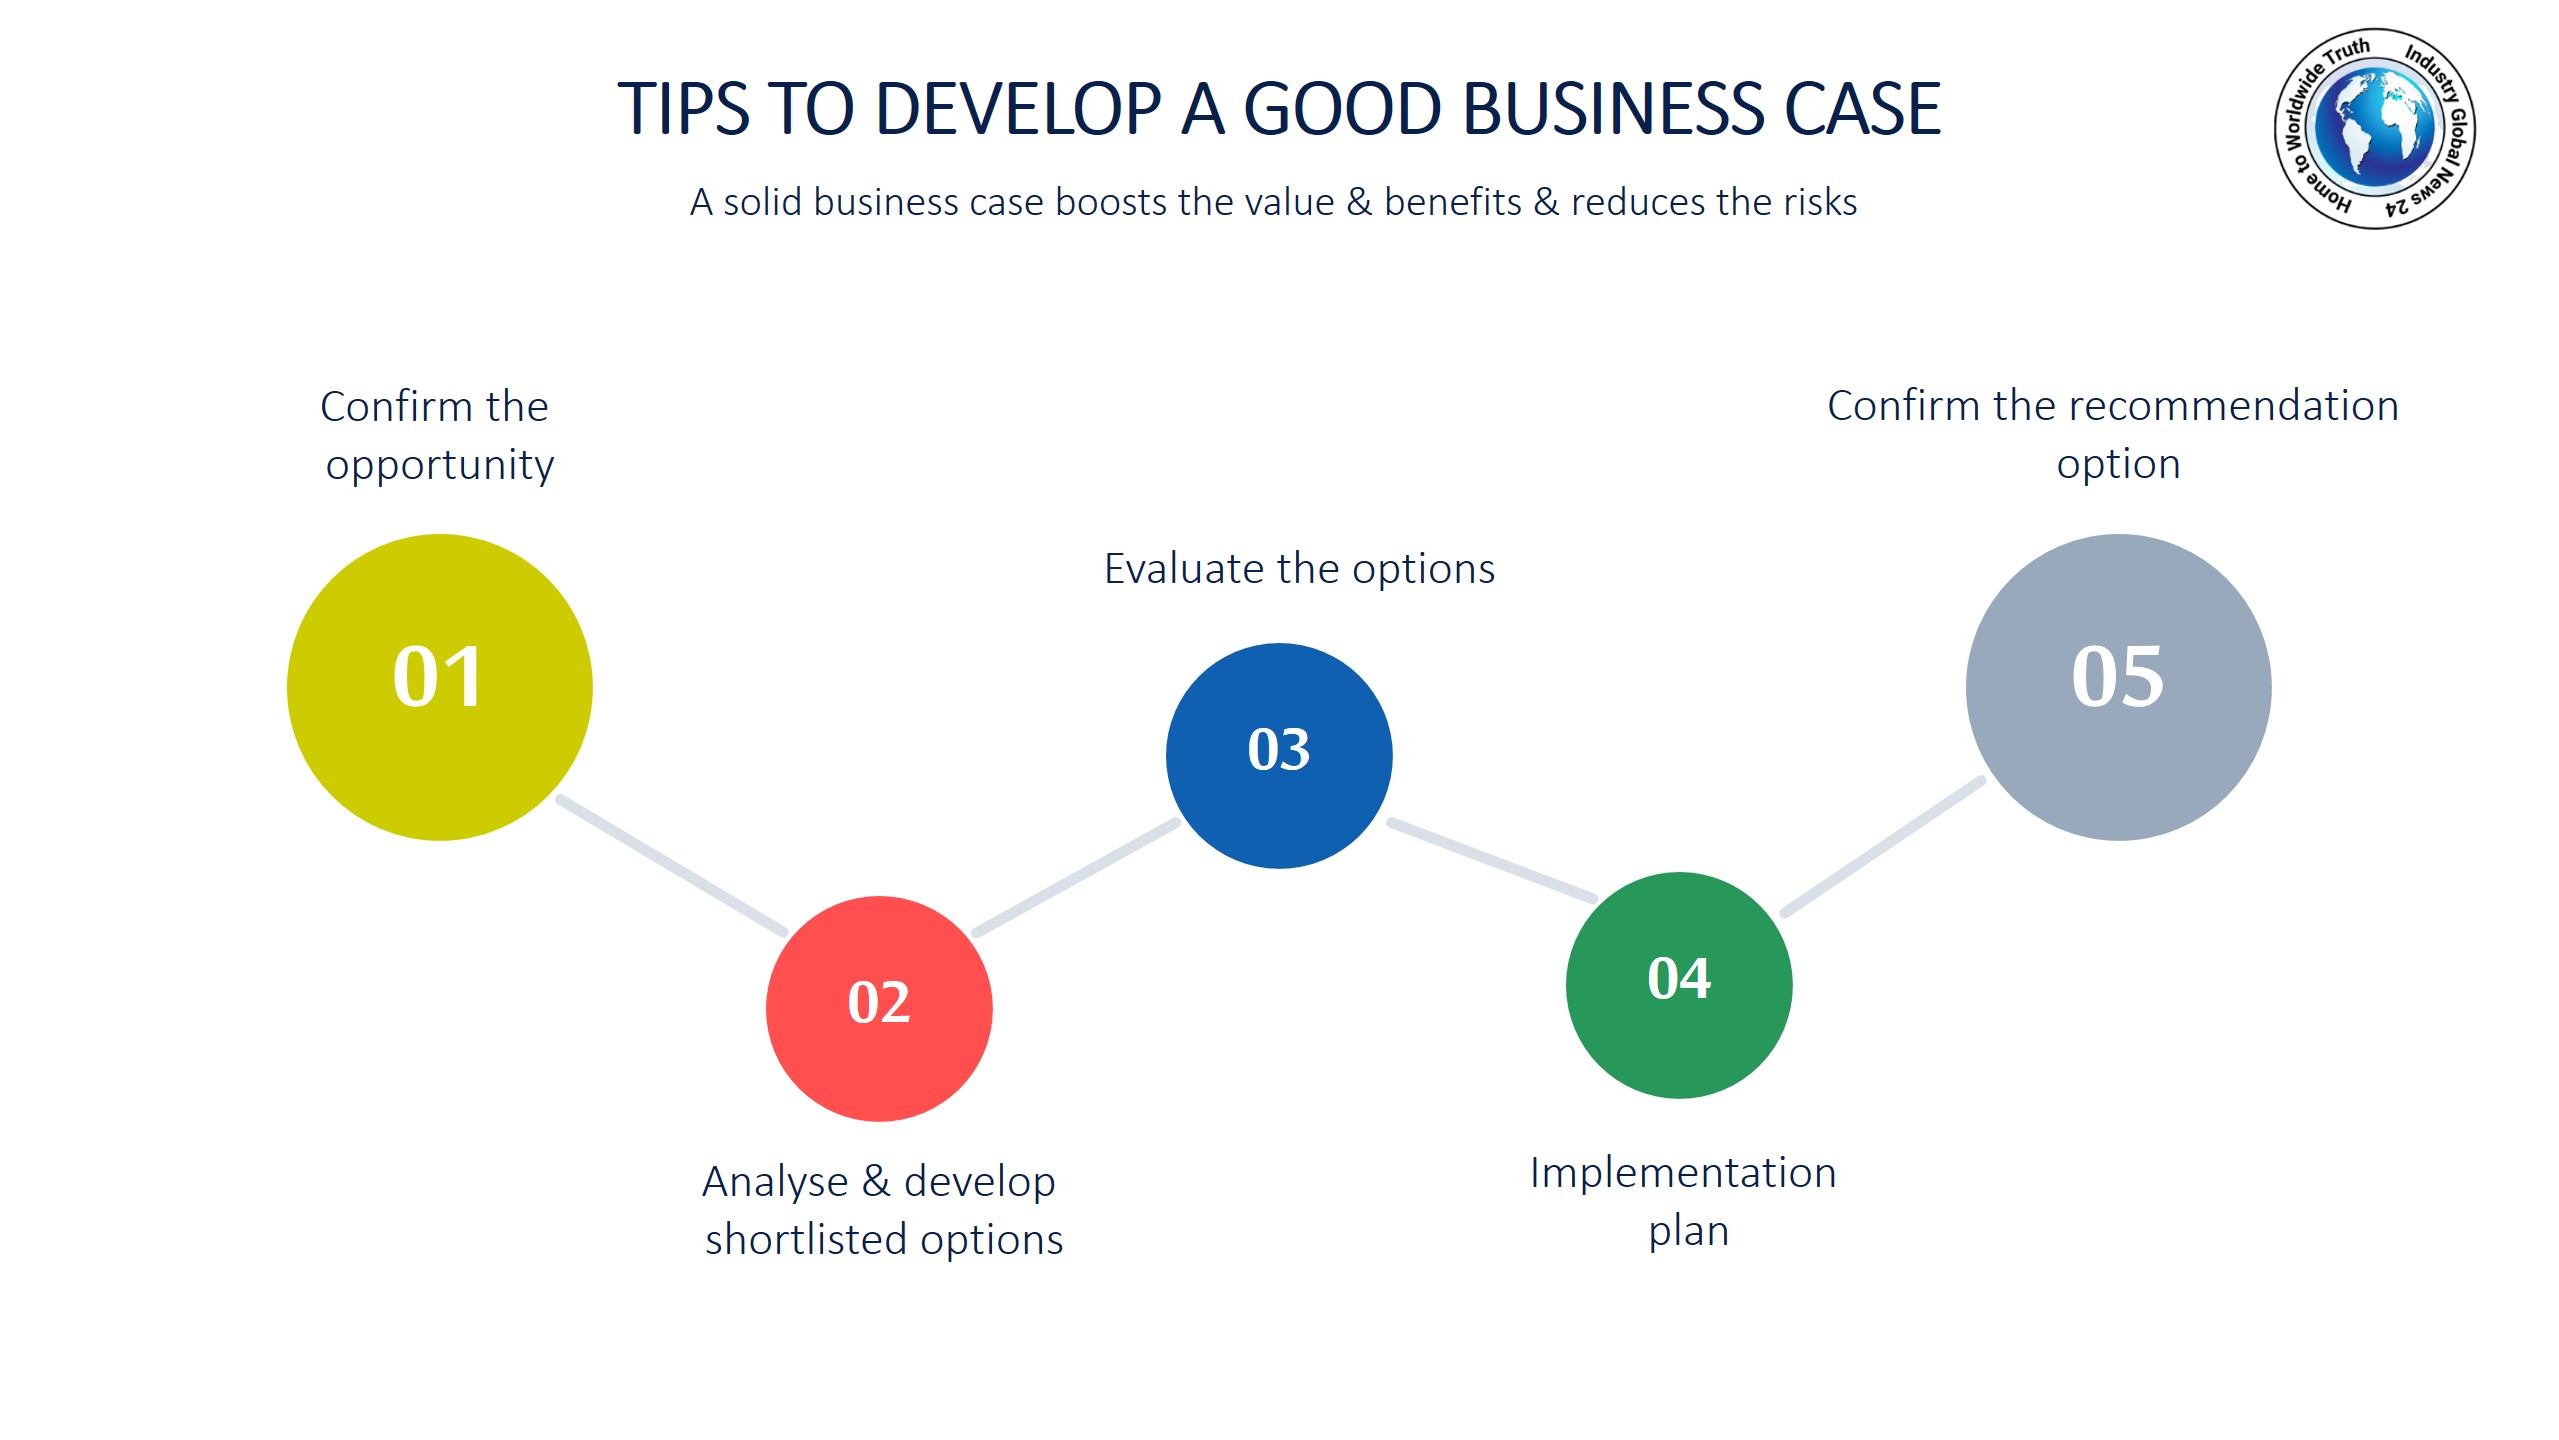 Tips to develop a good business case